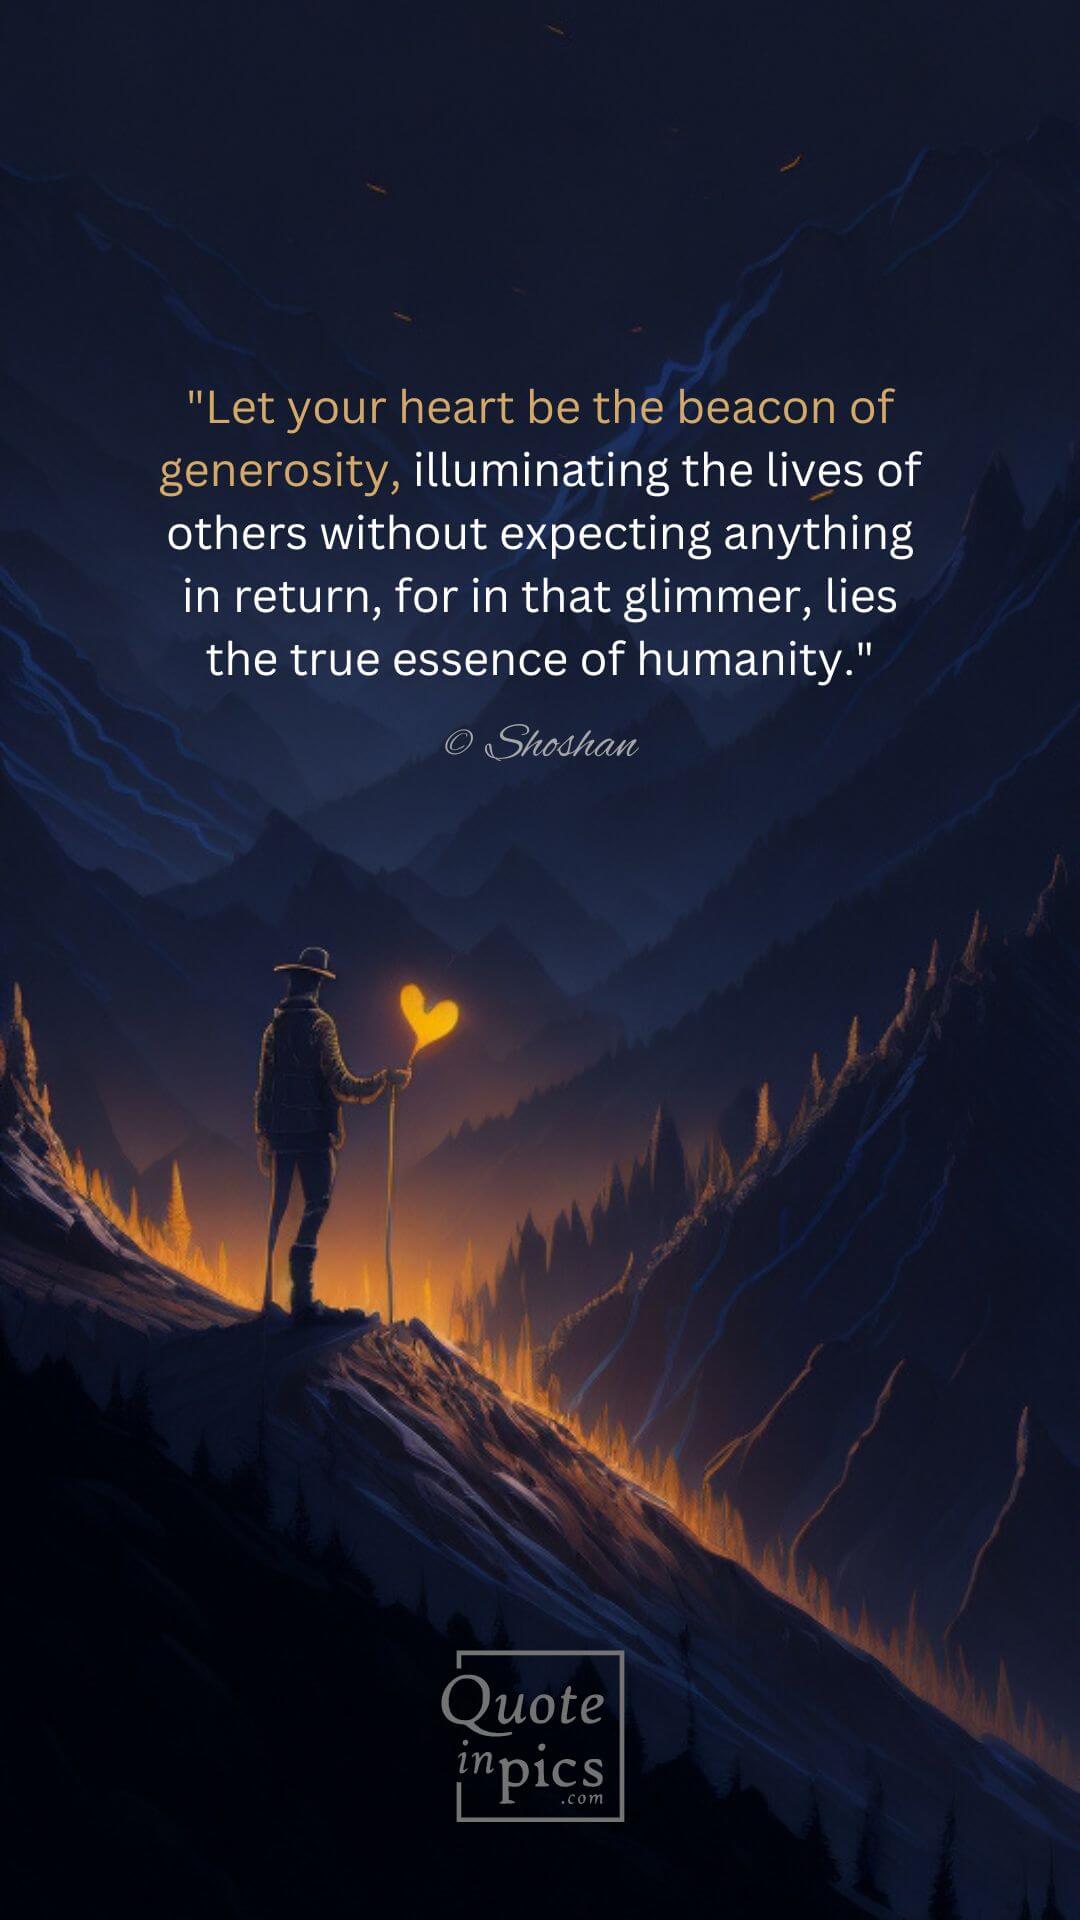 Let your heart be the beacon of generosity